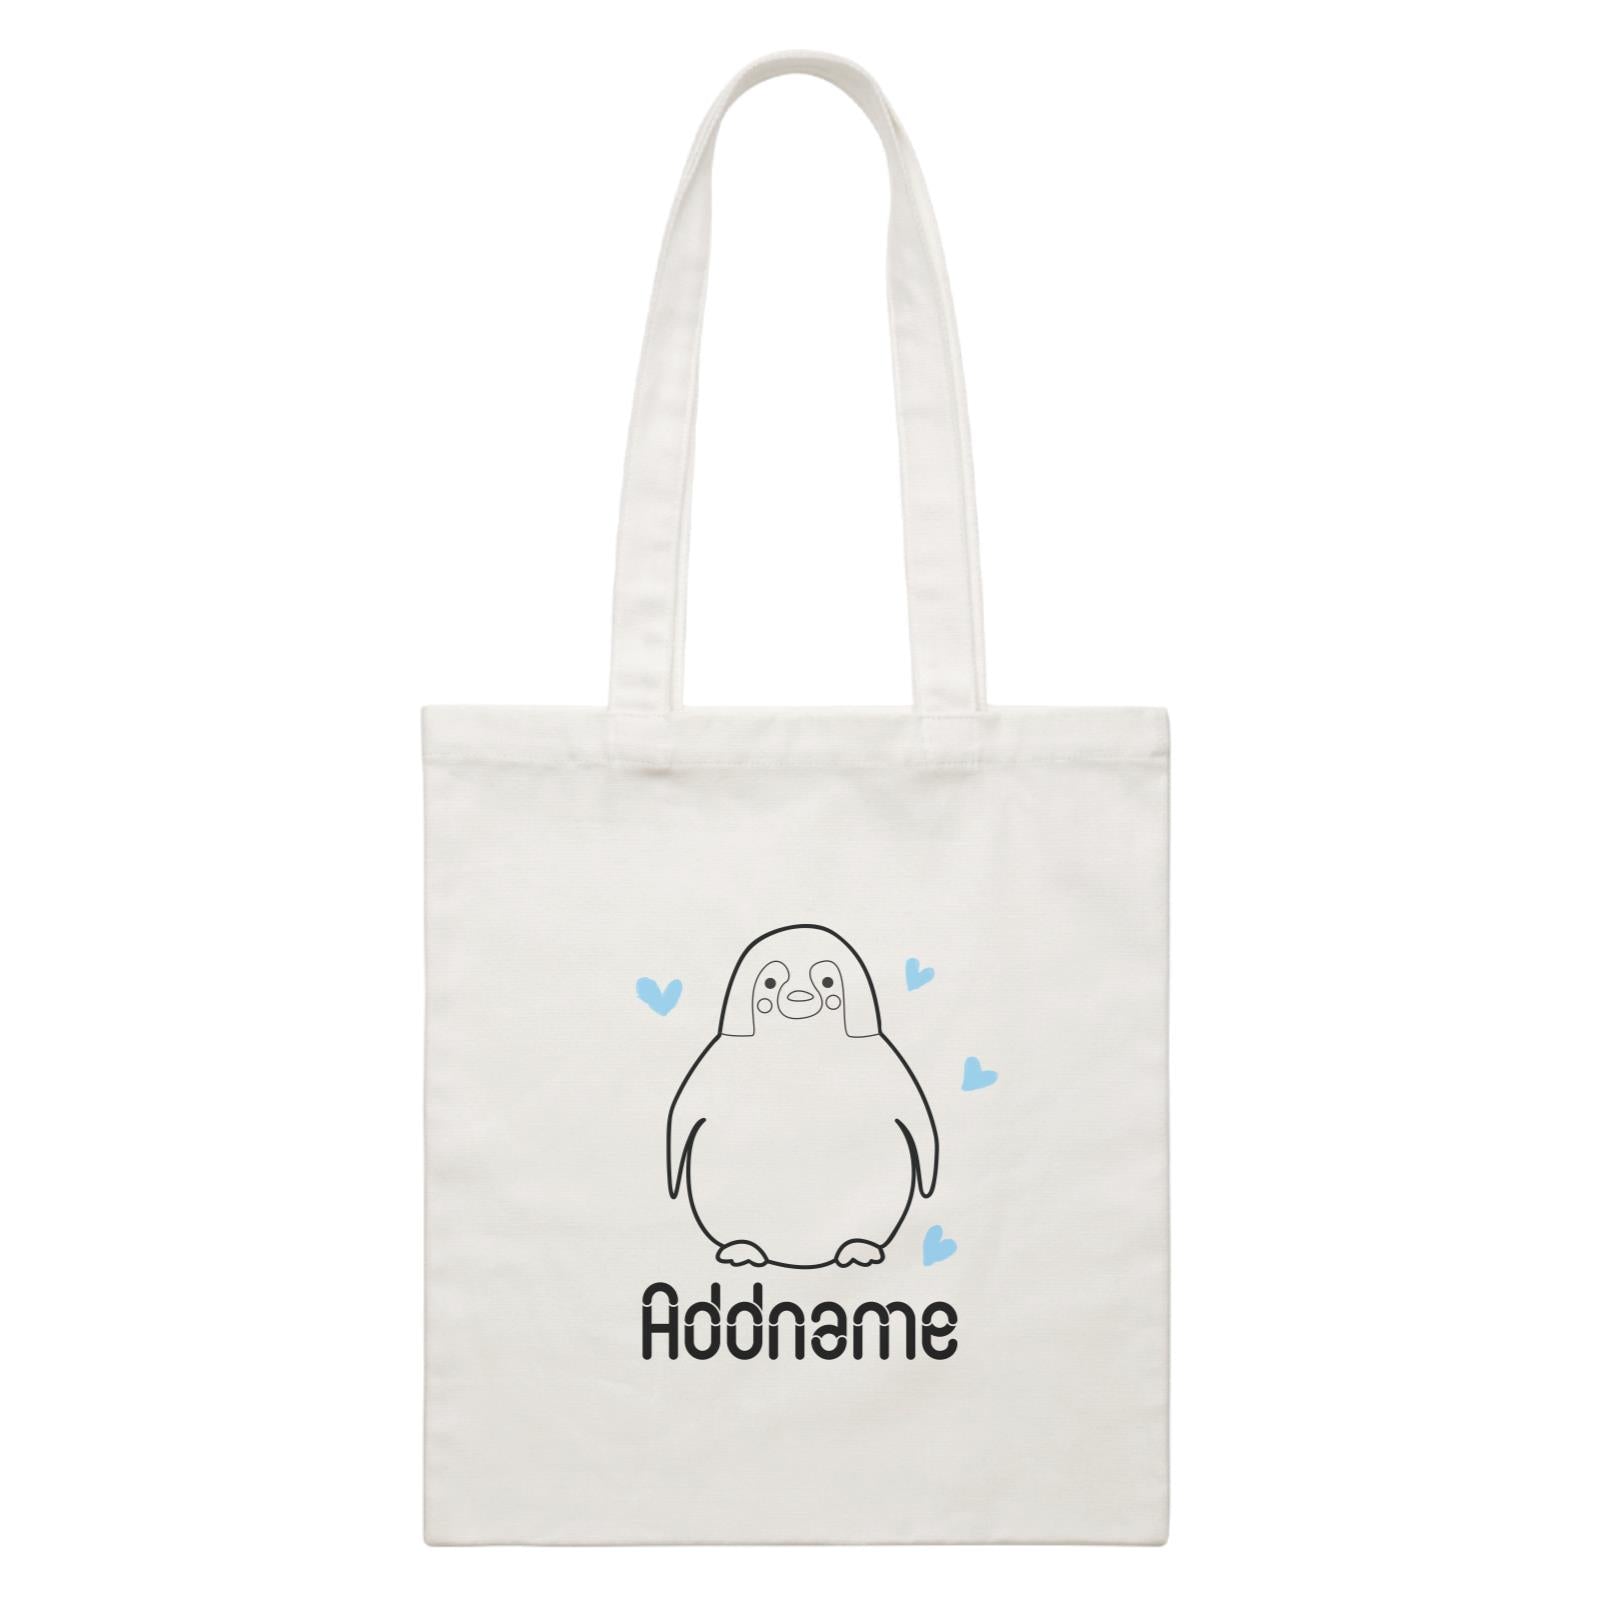 Coloring Outline Cute Hand Drawn Animals Cute Penguin Addname White White Canvas Bag